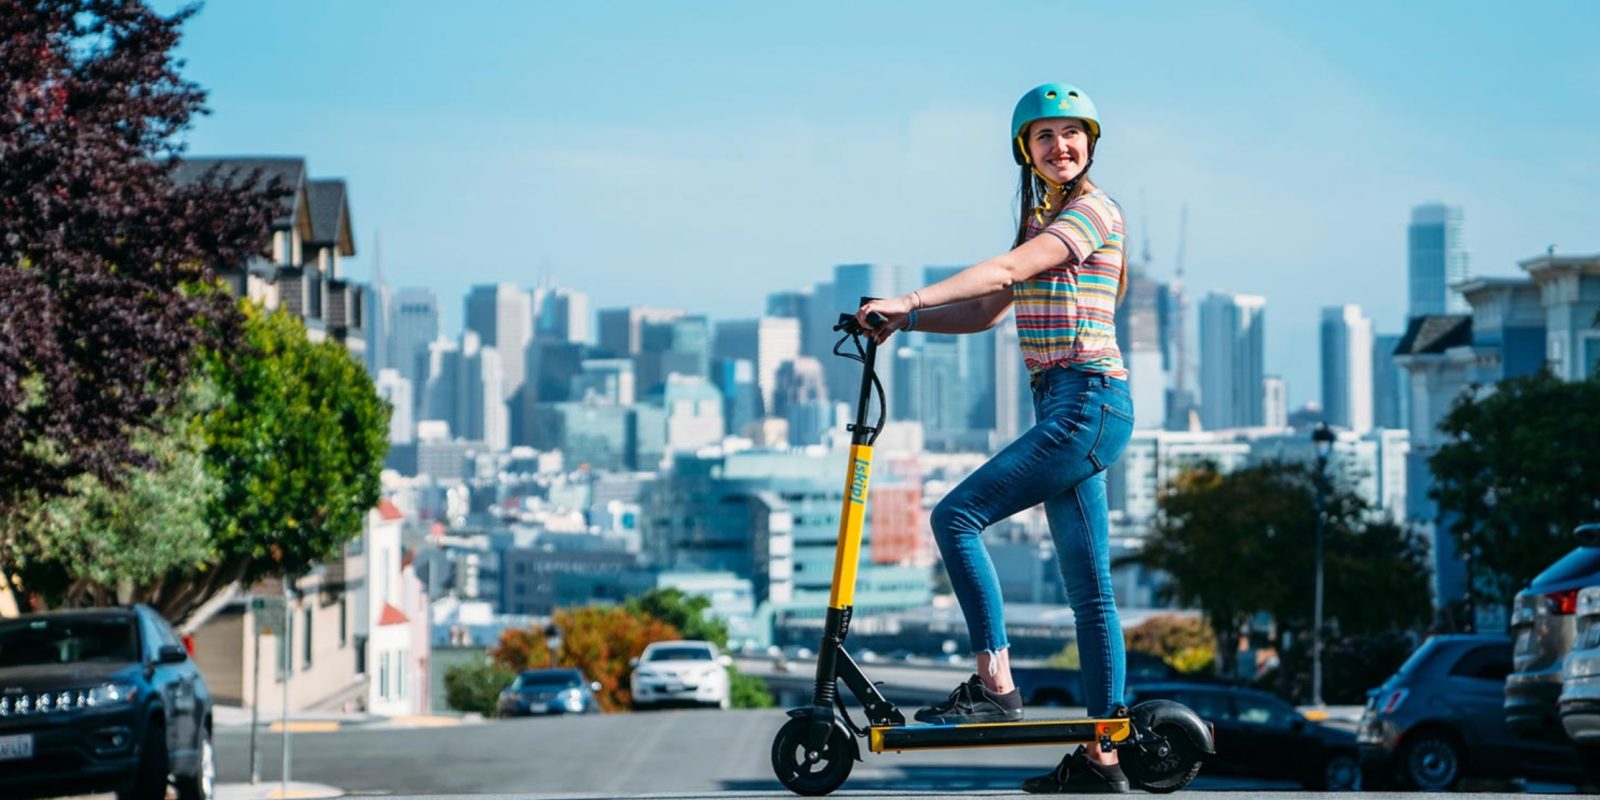 Elendig Overskyet sæt ind Boosted Board founders enter electric scooter wars, intend to compete on  quality and ethics | Electrek